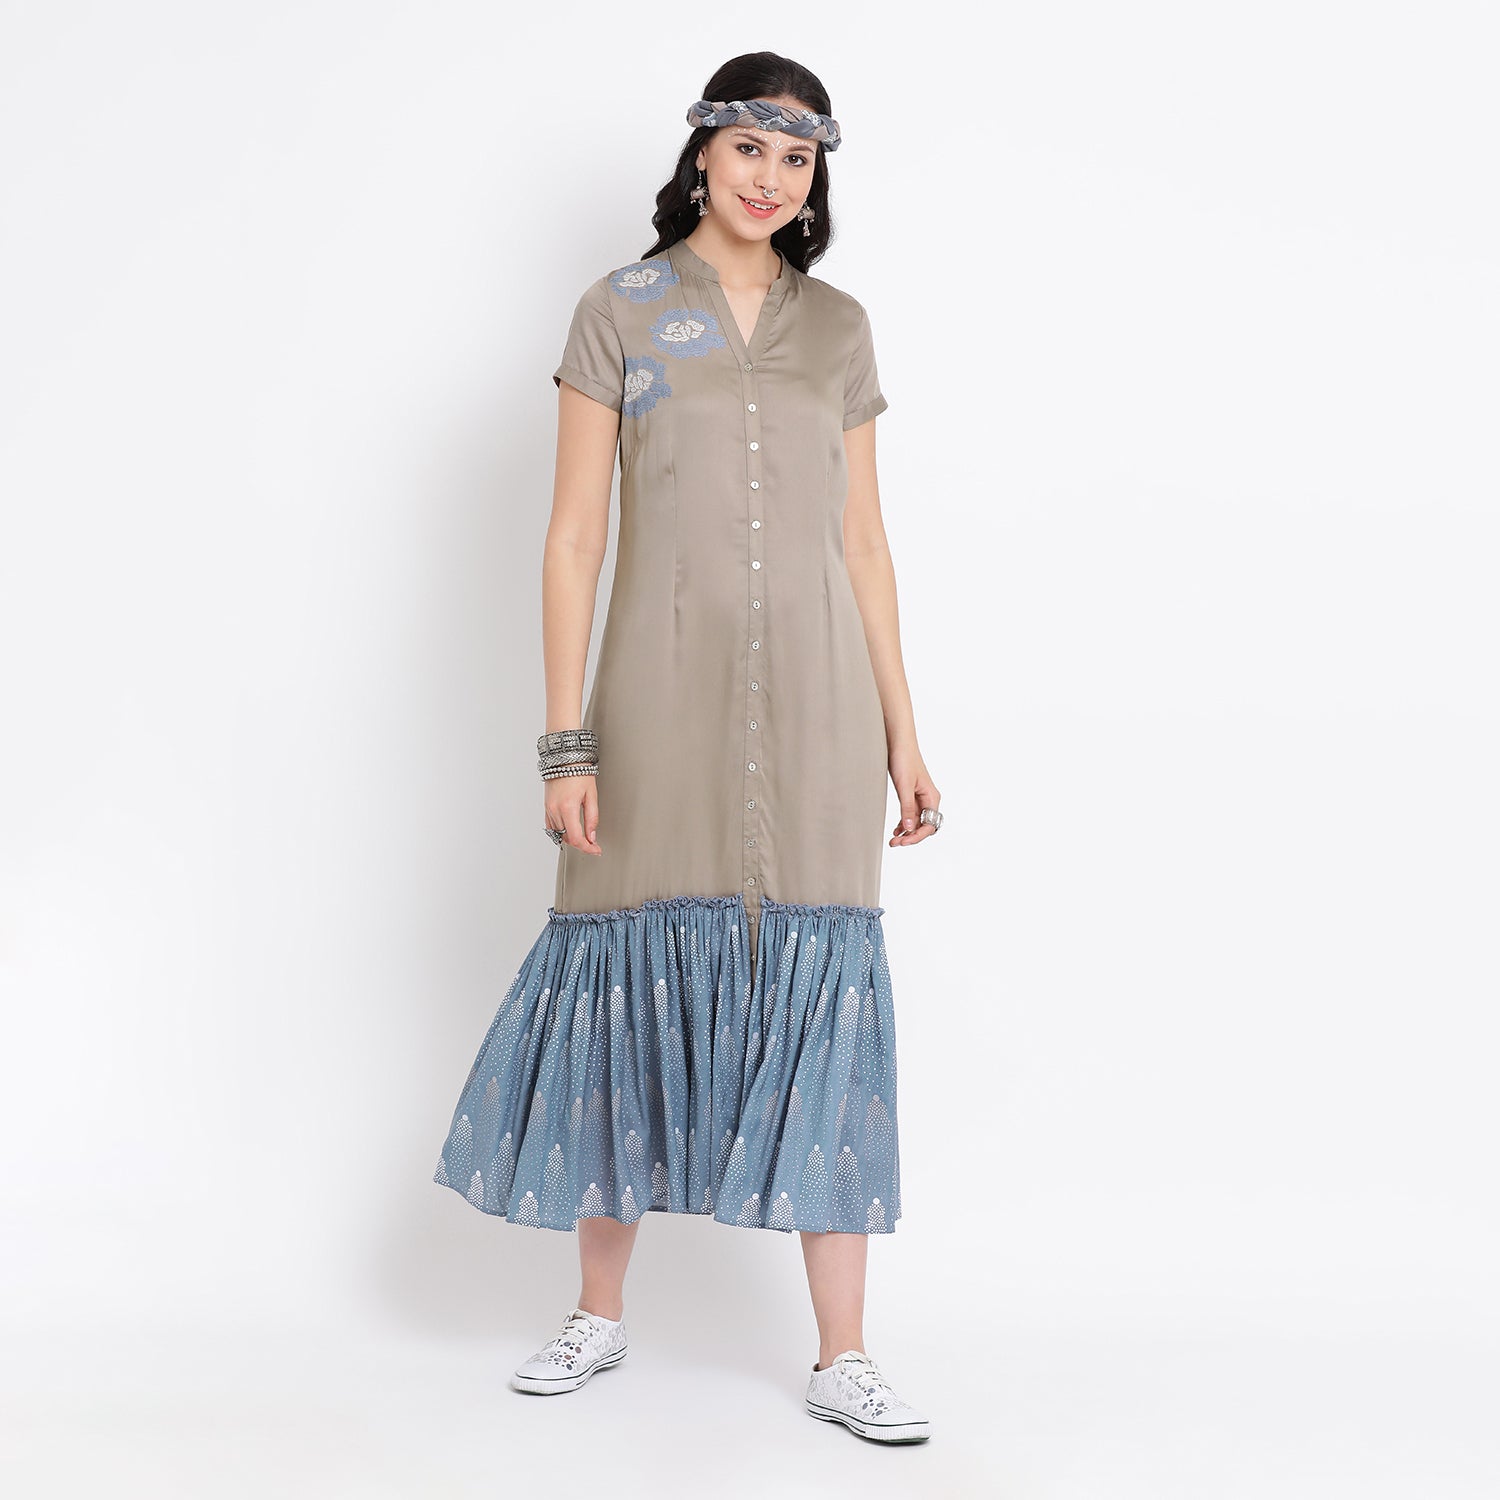 Grey long dress with printed frill and thread embroidery